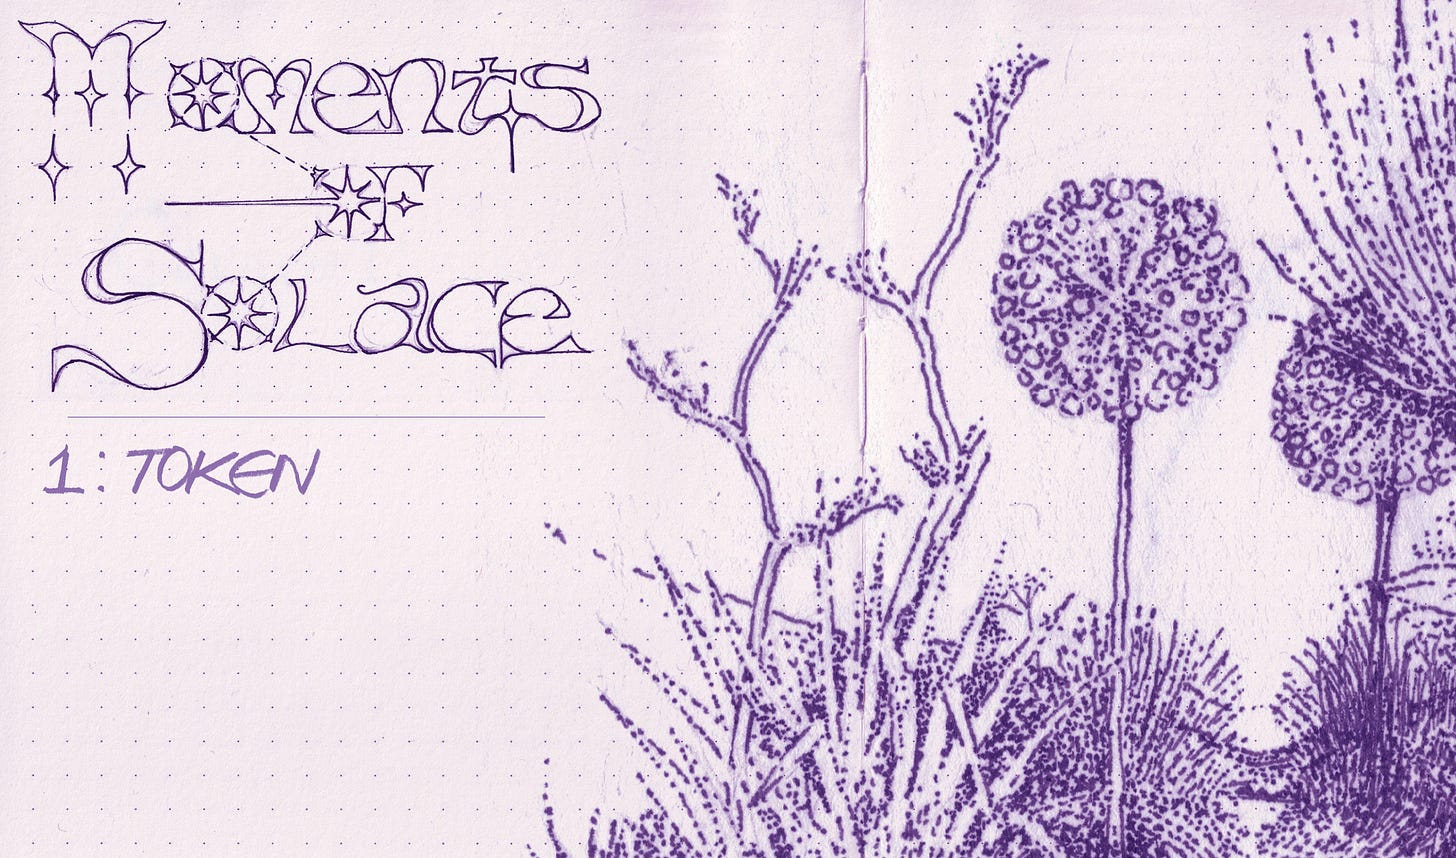 title of moments of solace - 1 token on a backdrop of hand drawn plants